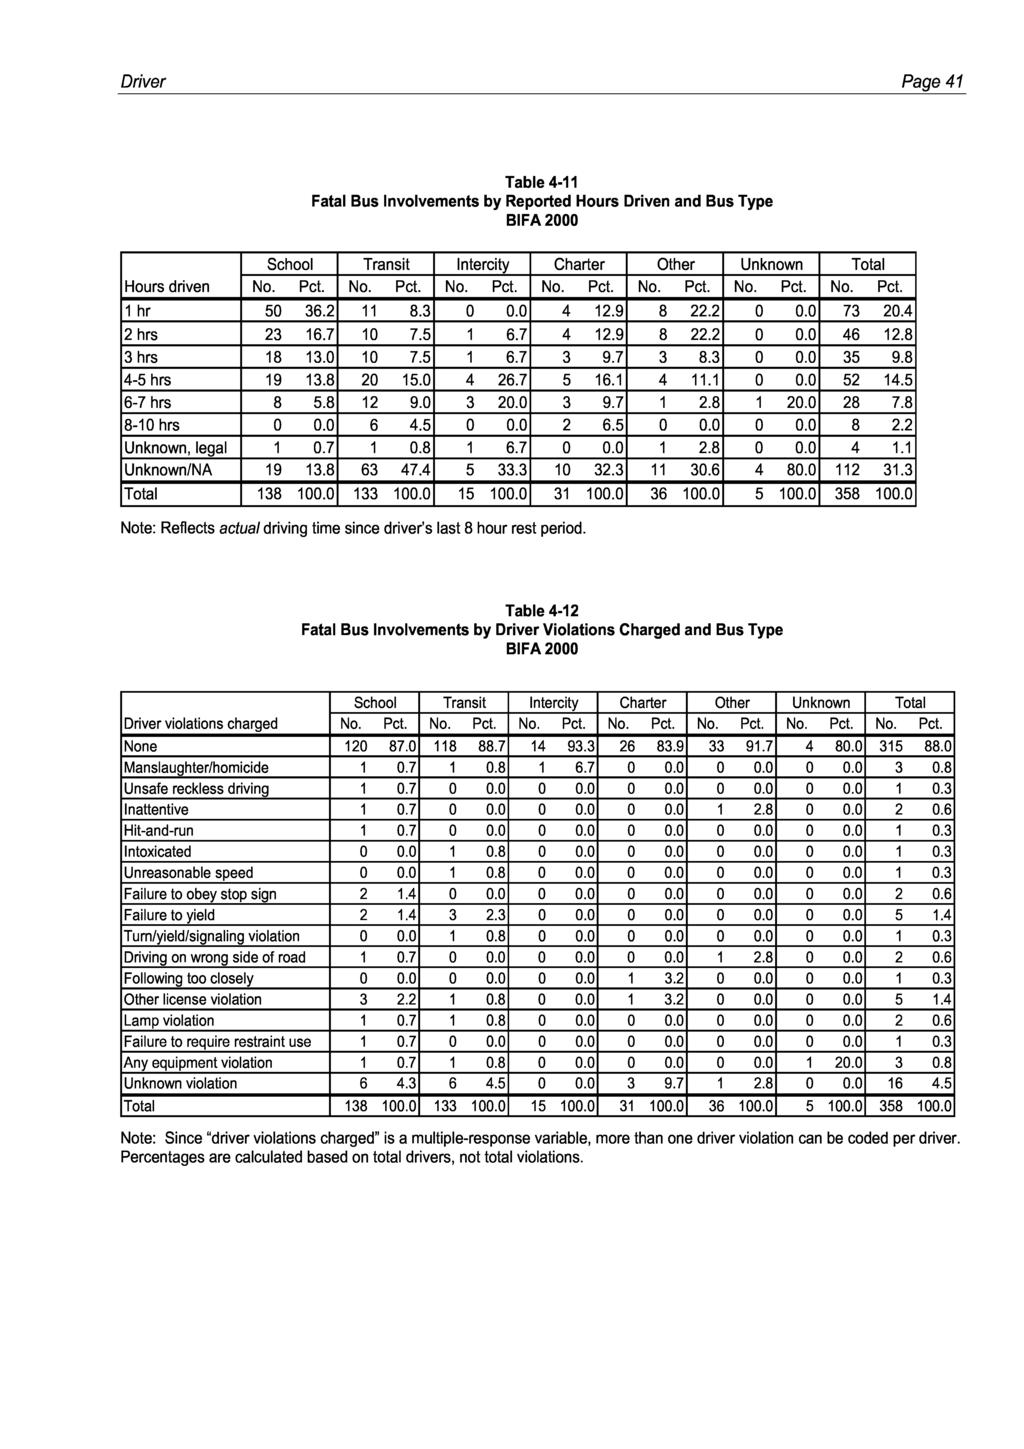 Driver Page 41 Table 4-1 1 Fatal Bus Involvements by Reported Hours Driven and Bus Type UnknownlNA Total 19 13.8 138 100.0 63 47.4 133 100.0 5 33.3 15 100.0 10 32.3 31 100.0 11 30.6 36 100.0 4 80.